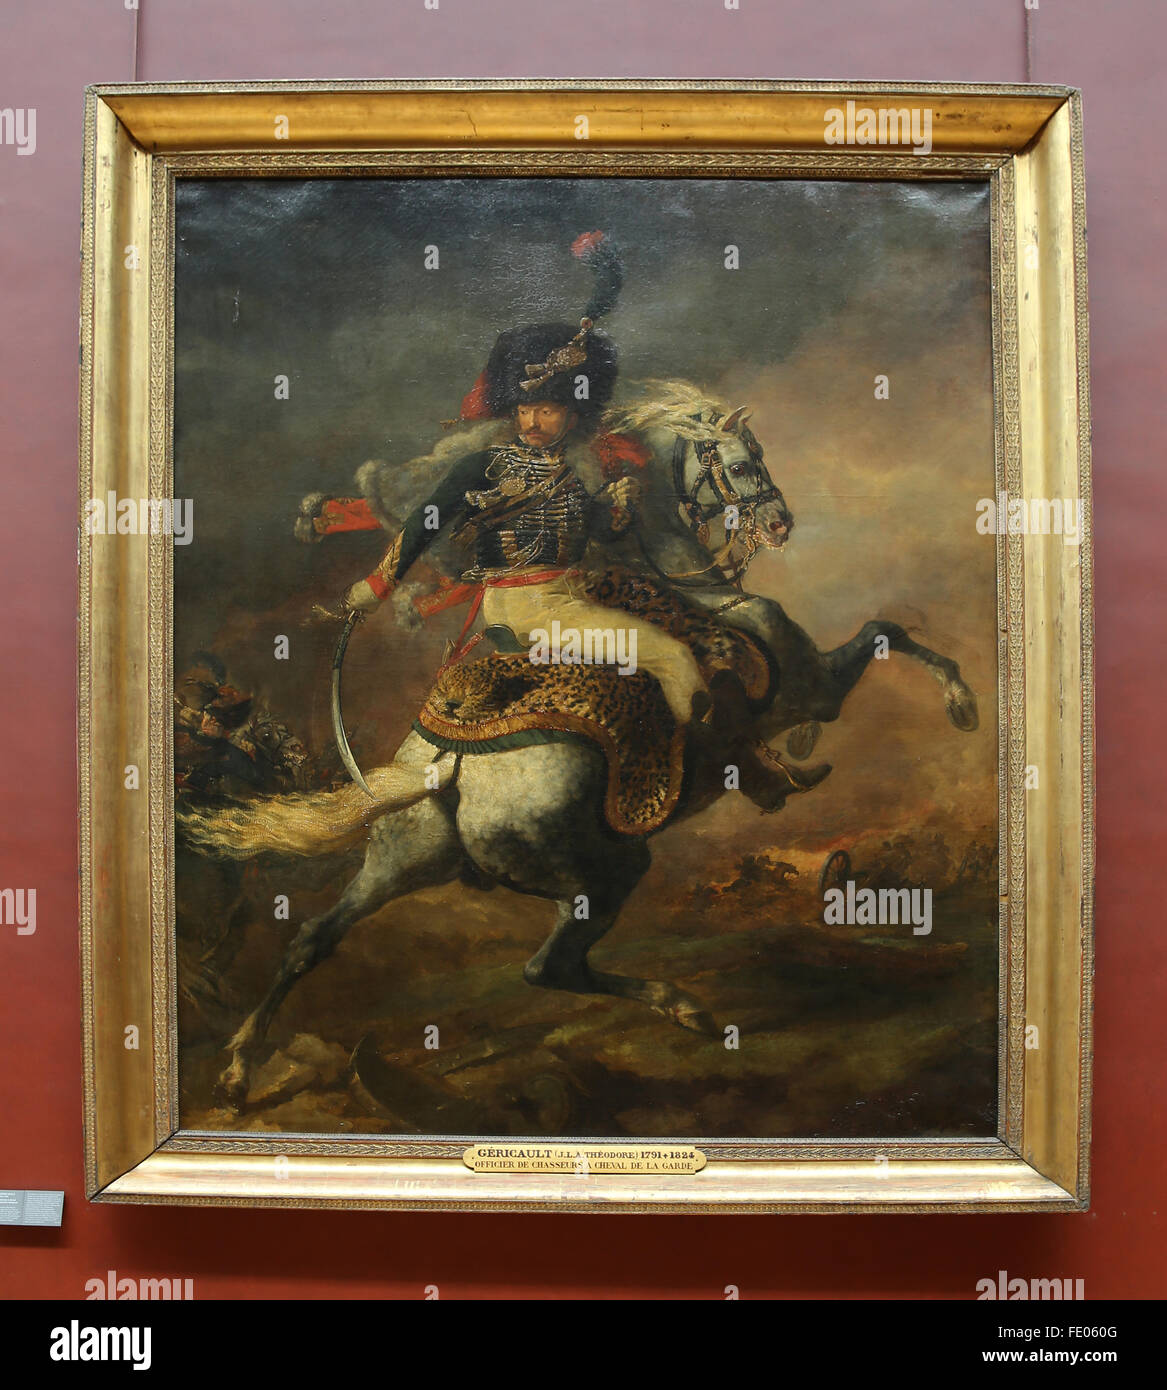 The Charging Chasseur, 1812 by French painter Eugene Delacroix (1798-1863). Oil on canvas. Louvre Museum, Paris, France. Stock Photo